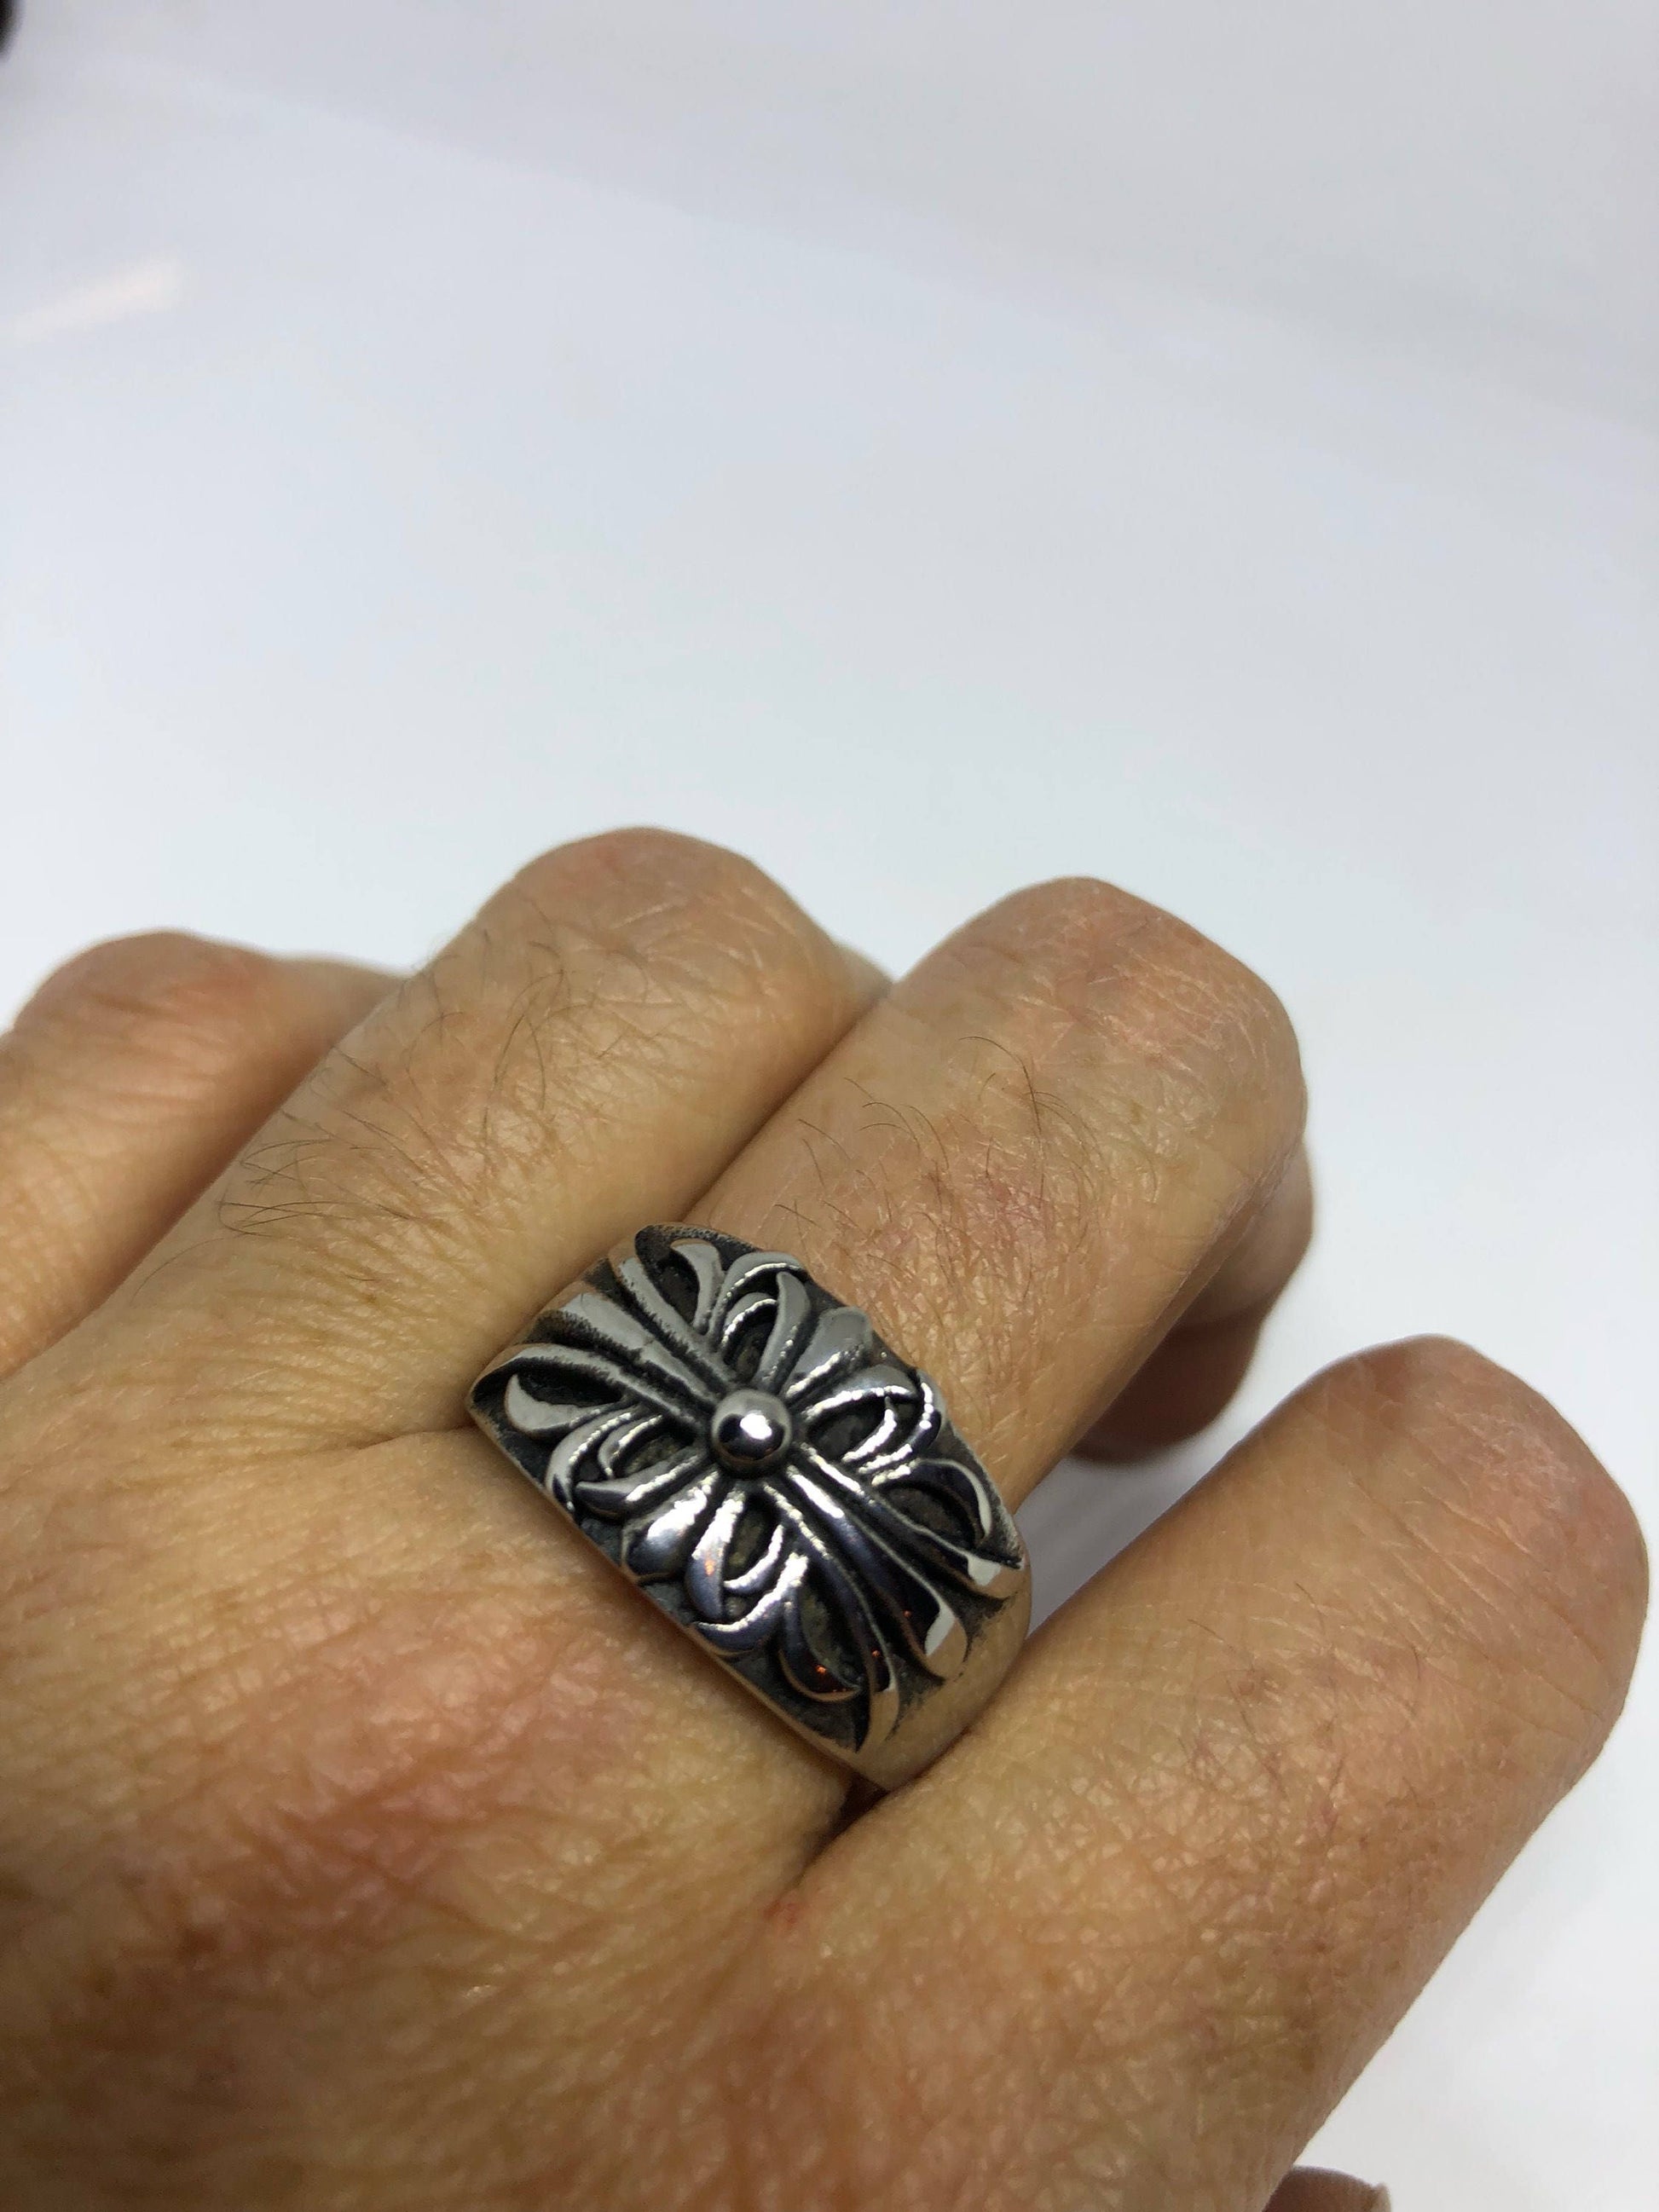 Vintage Silver Stainless Steel Gothic Cross Mens Ring